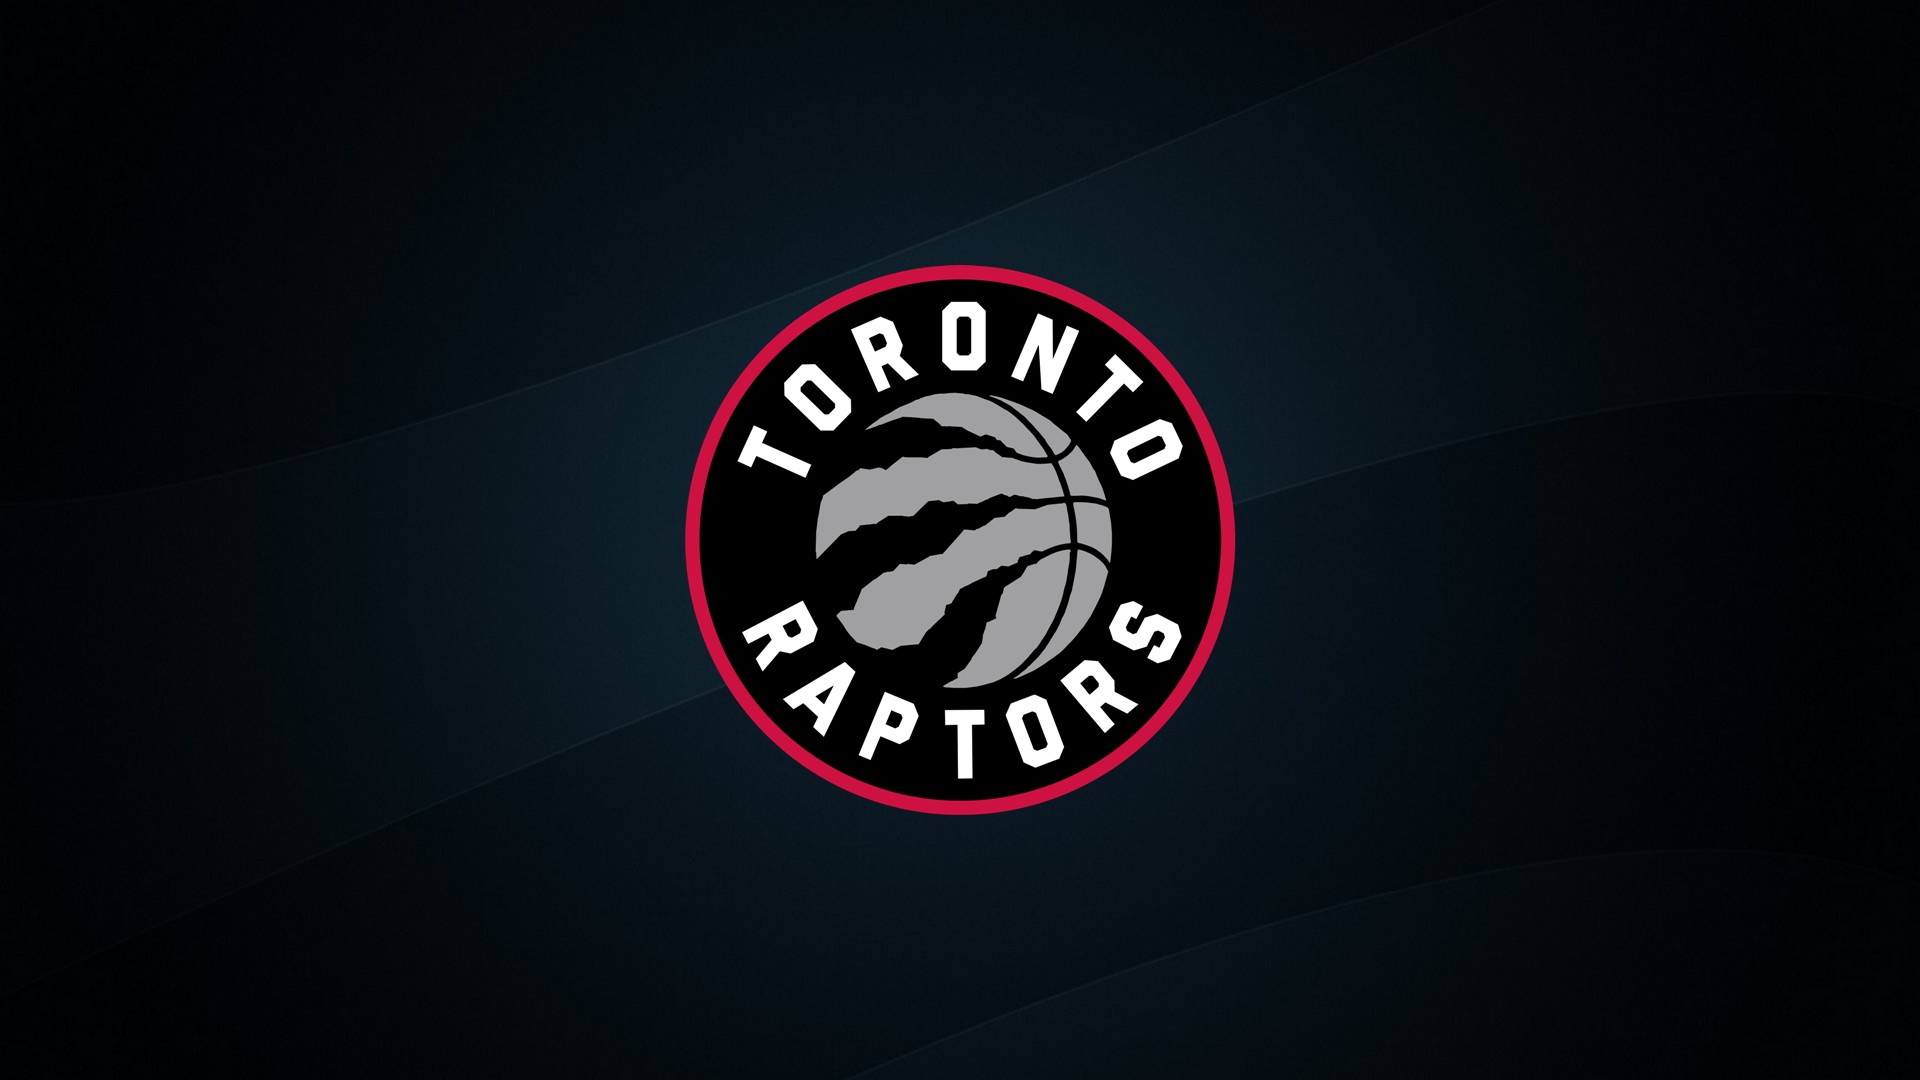 HD Desktop Wallpaper Basketball Toronto with image dimensions 1920X1080 pixel. You can make this wallpaper for your Desktop Computer Backgrounds, Windows or Mac Screensavers, iPhone Lock screen, Tablet or Android and another Mobile Phone device